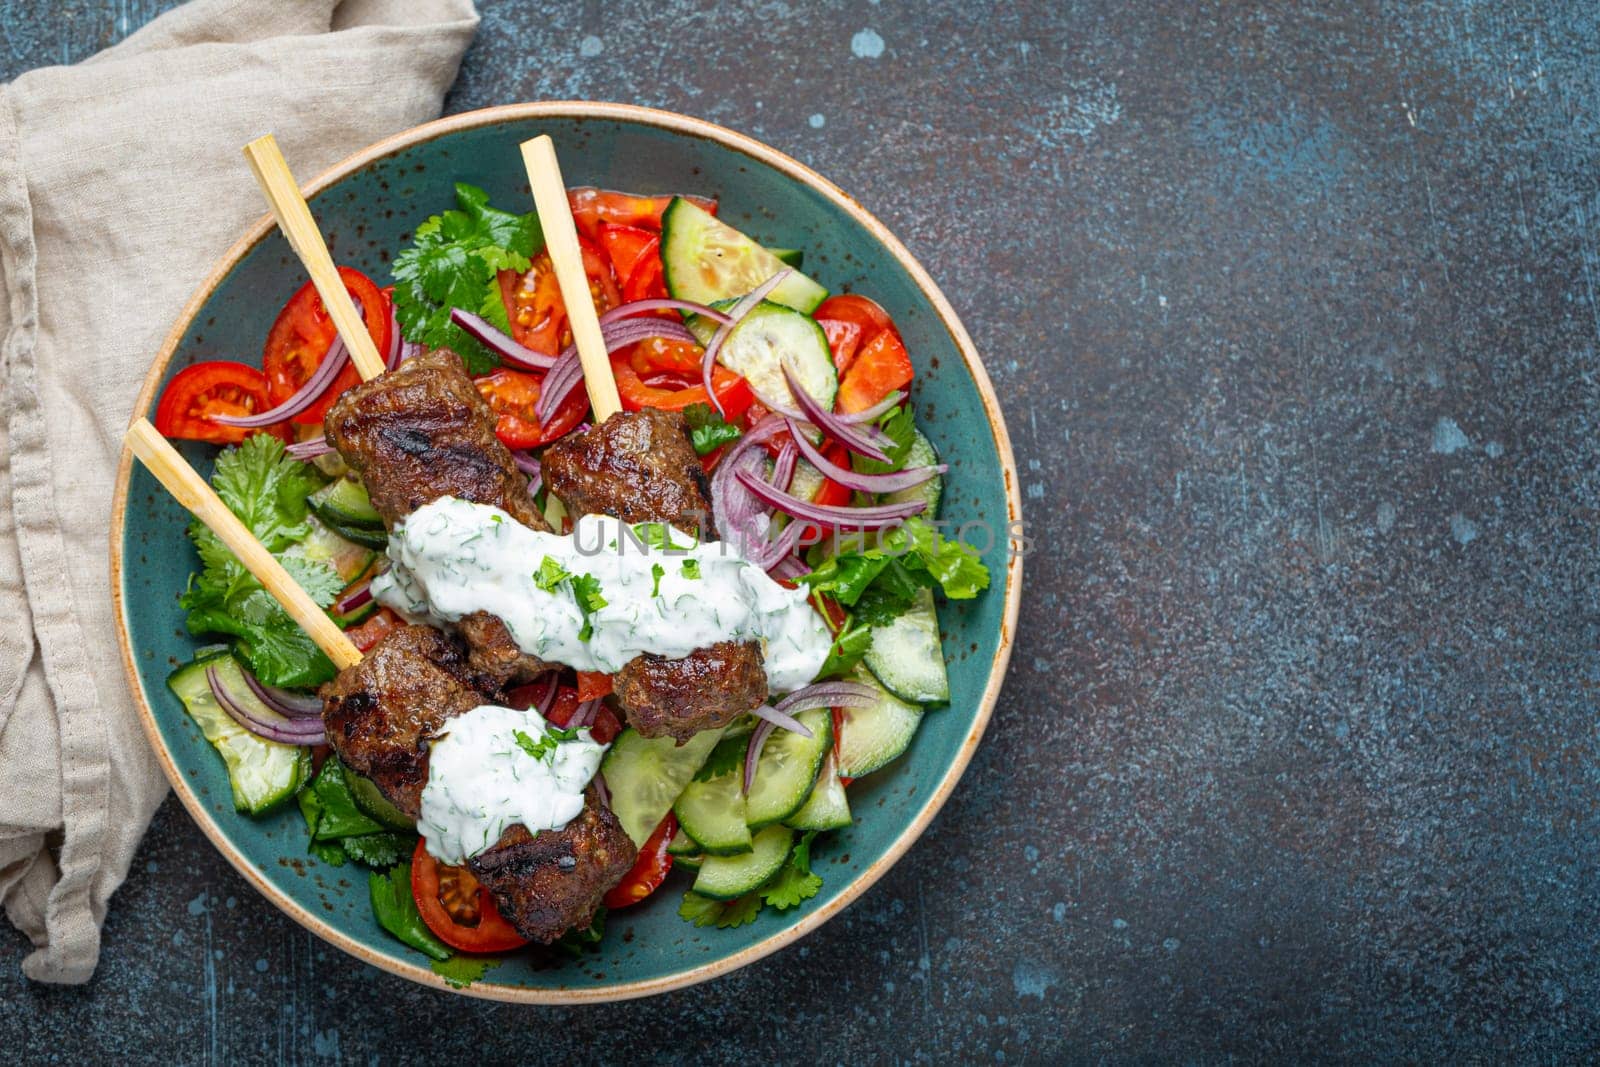 Grilled skewer meat beef kebabs on sticks served with fresh vegetables salad on plate on rustic concrete background from above. Traditional Middle Eastern and Turkish dish Kebab, space for text